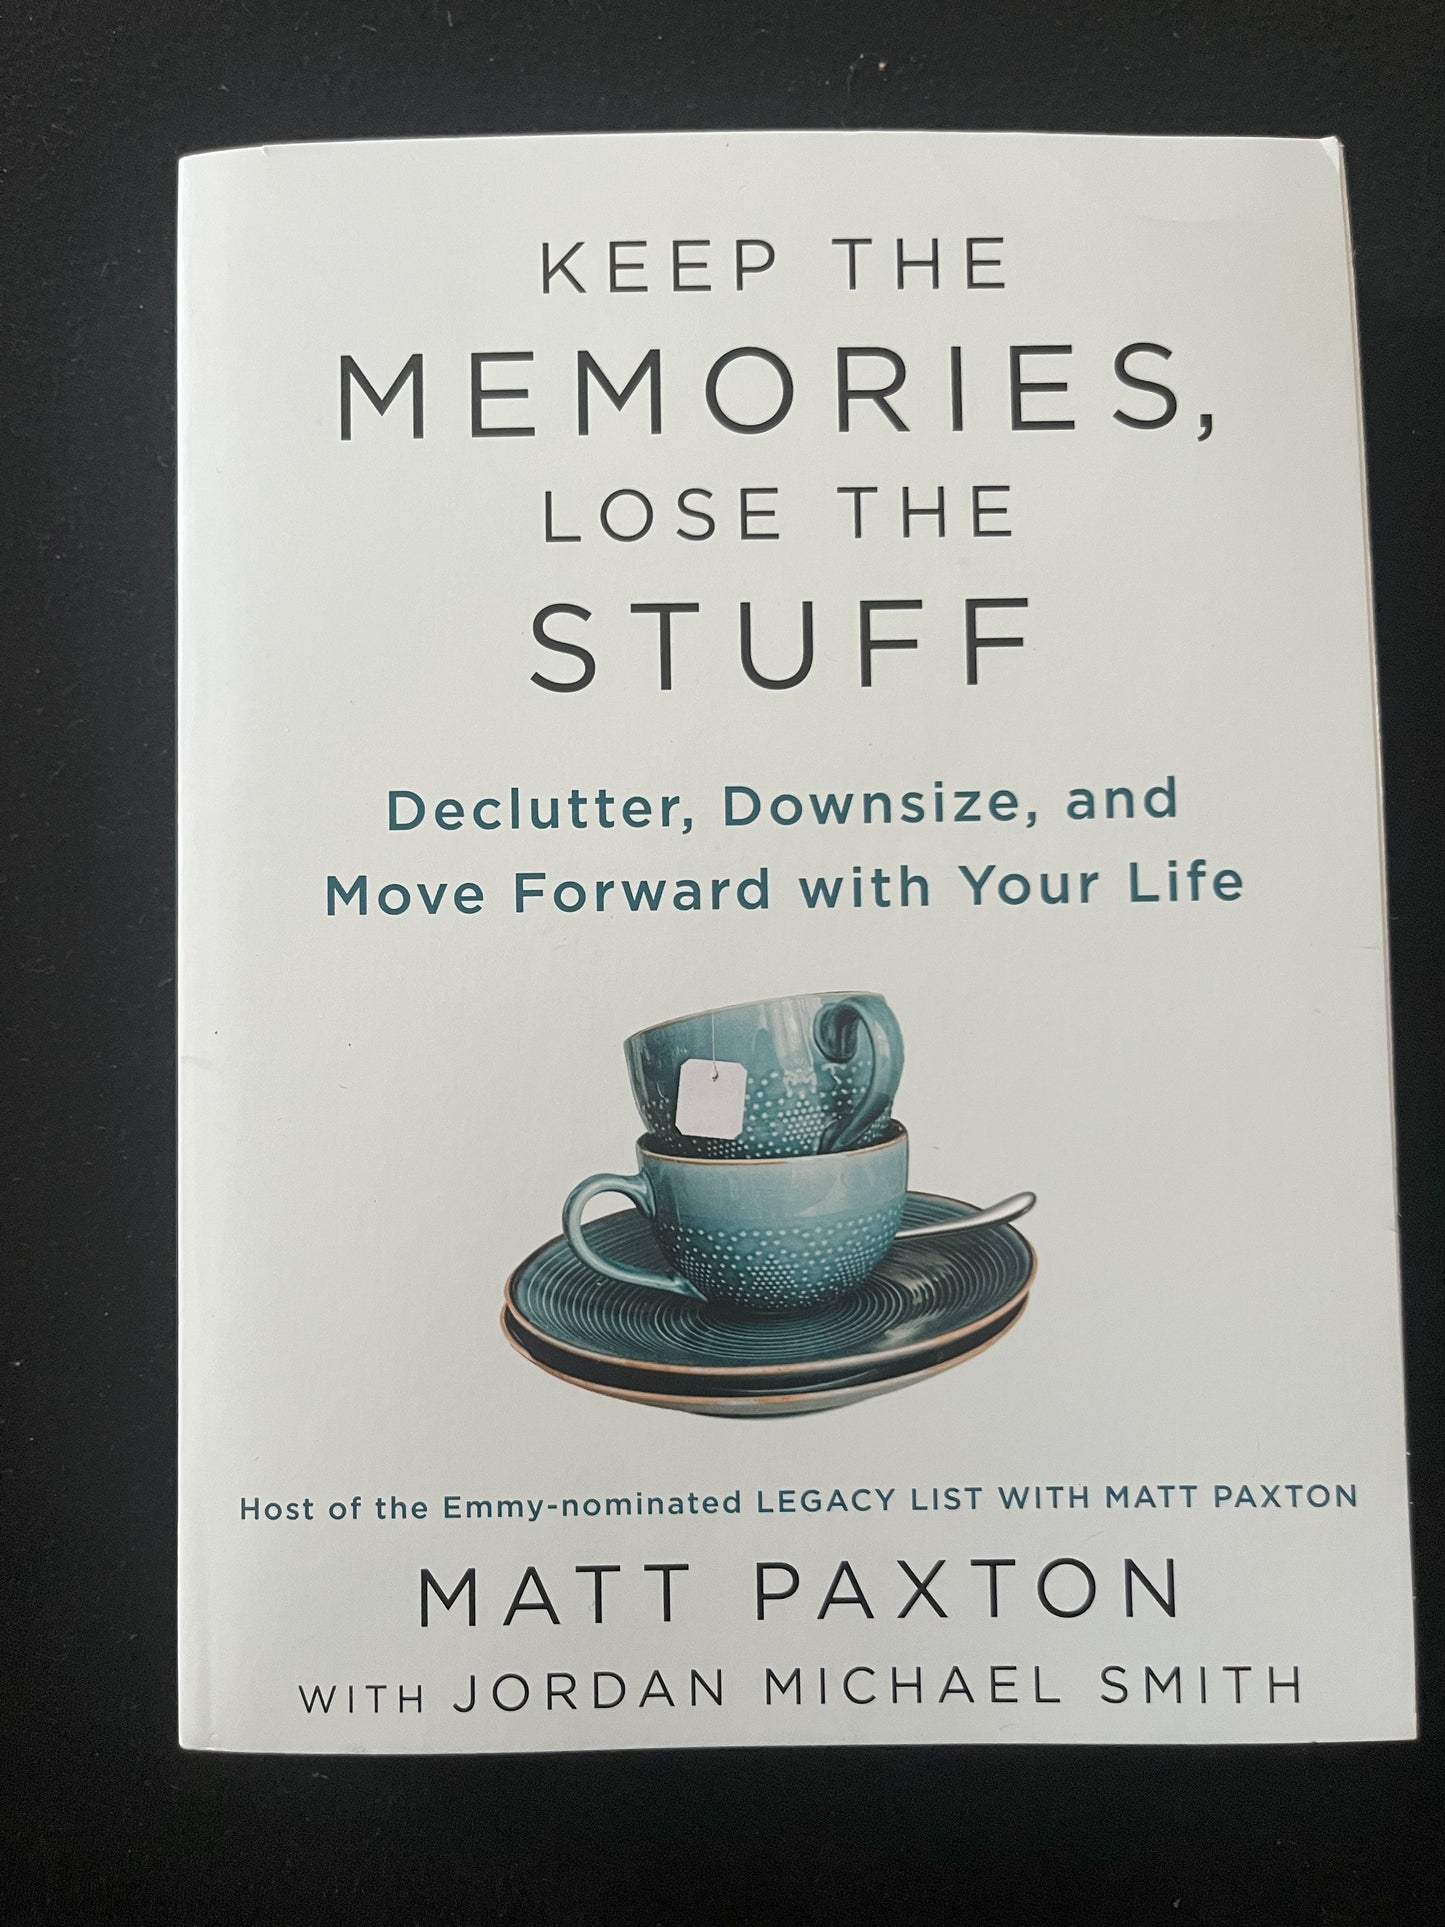 KEEP THE MEMORIES, LOSE THE STUFF by Matt Paxton